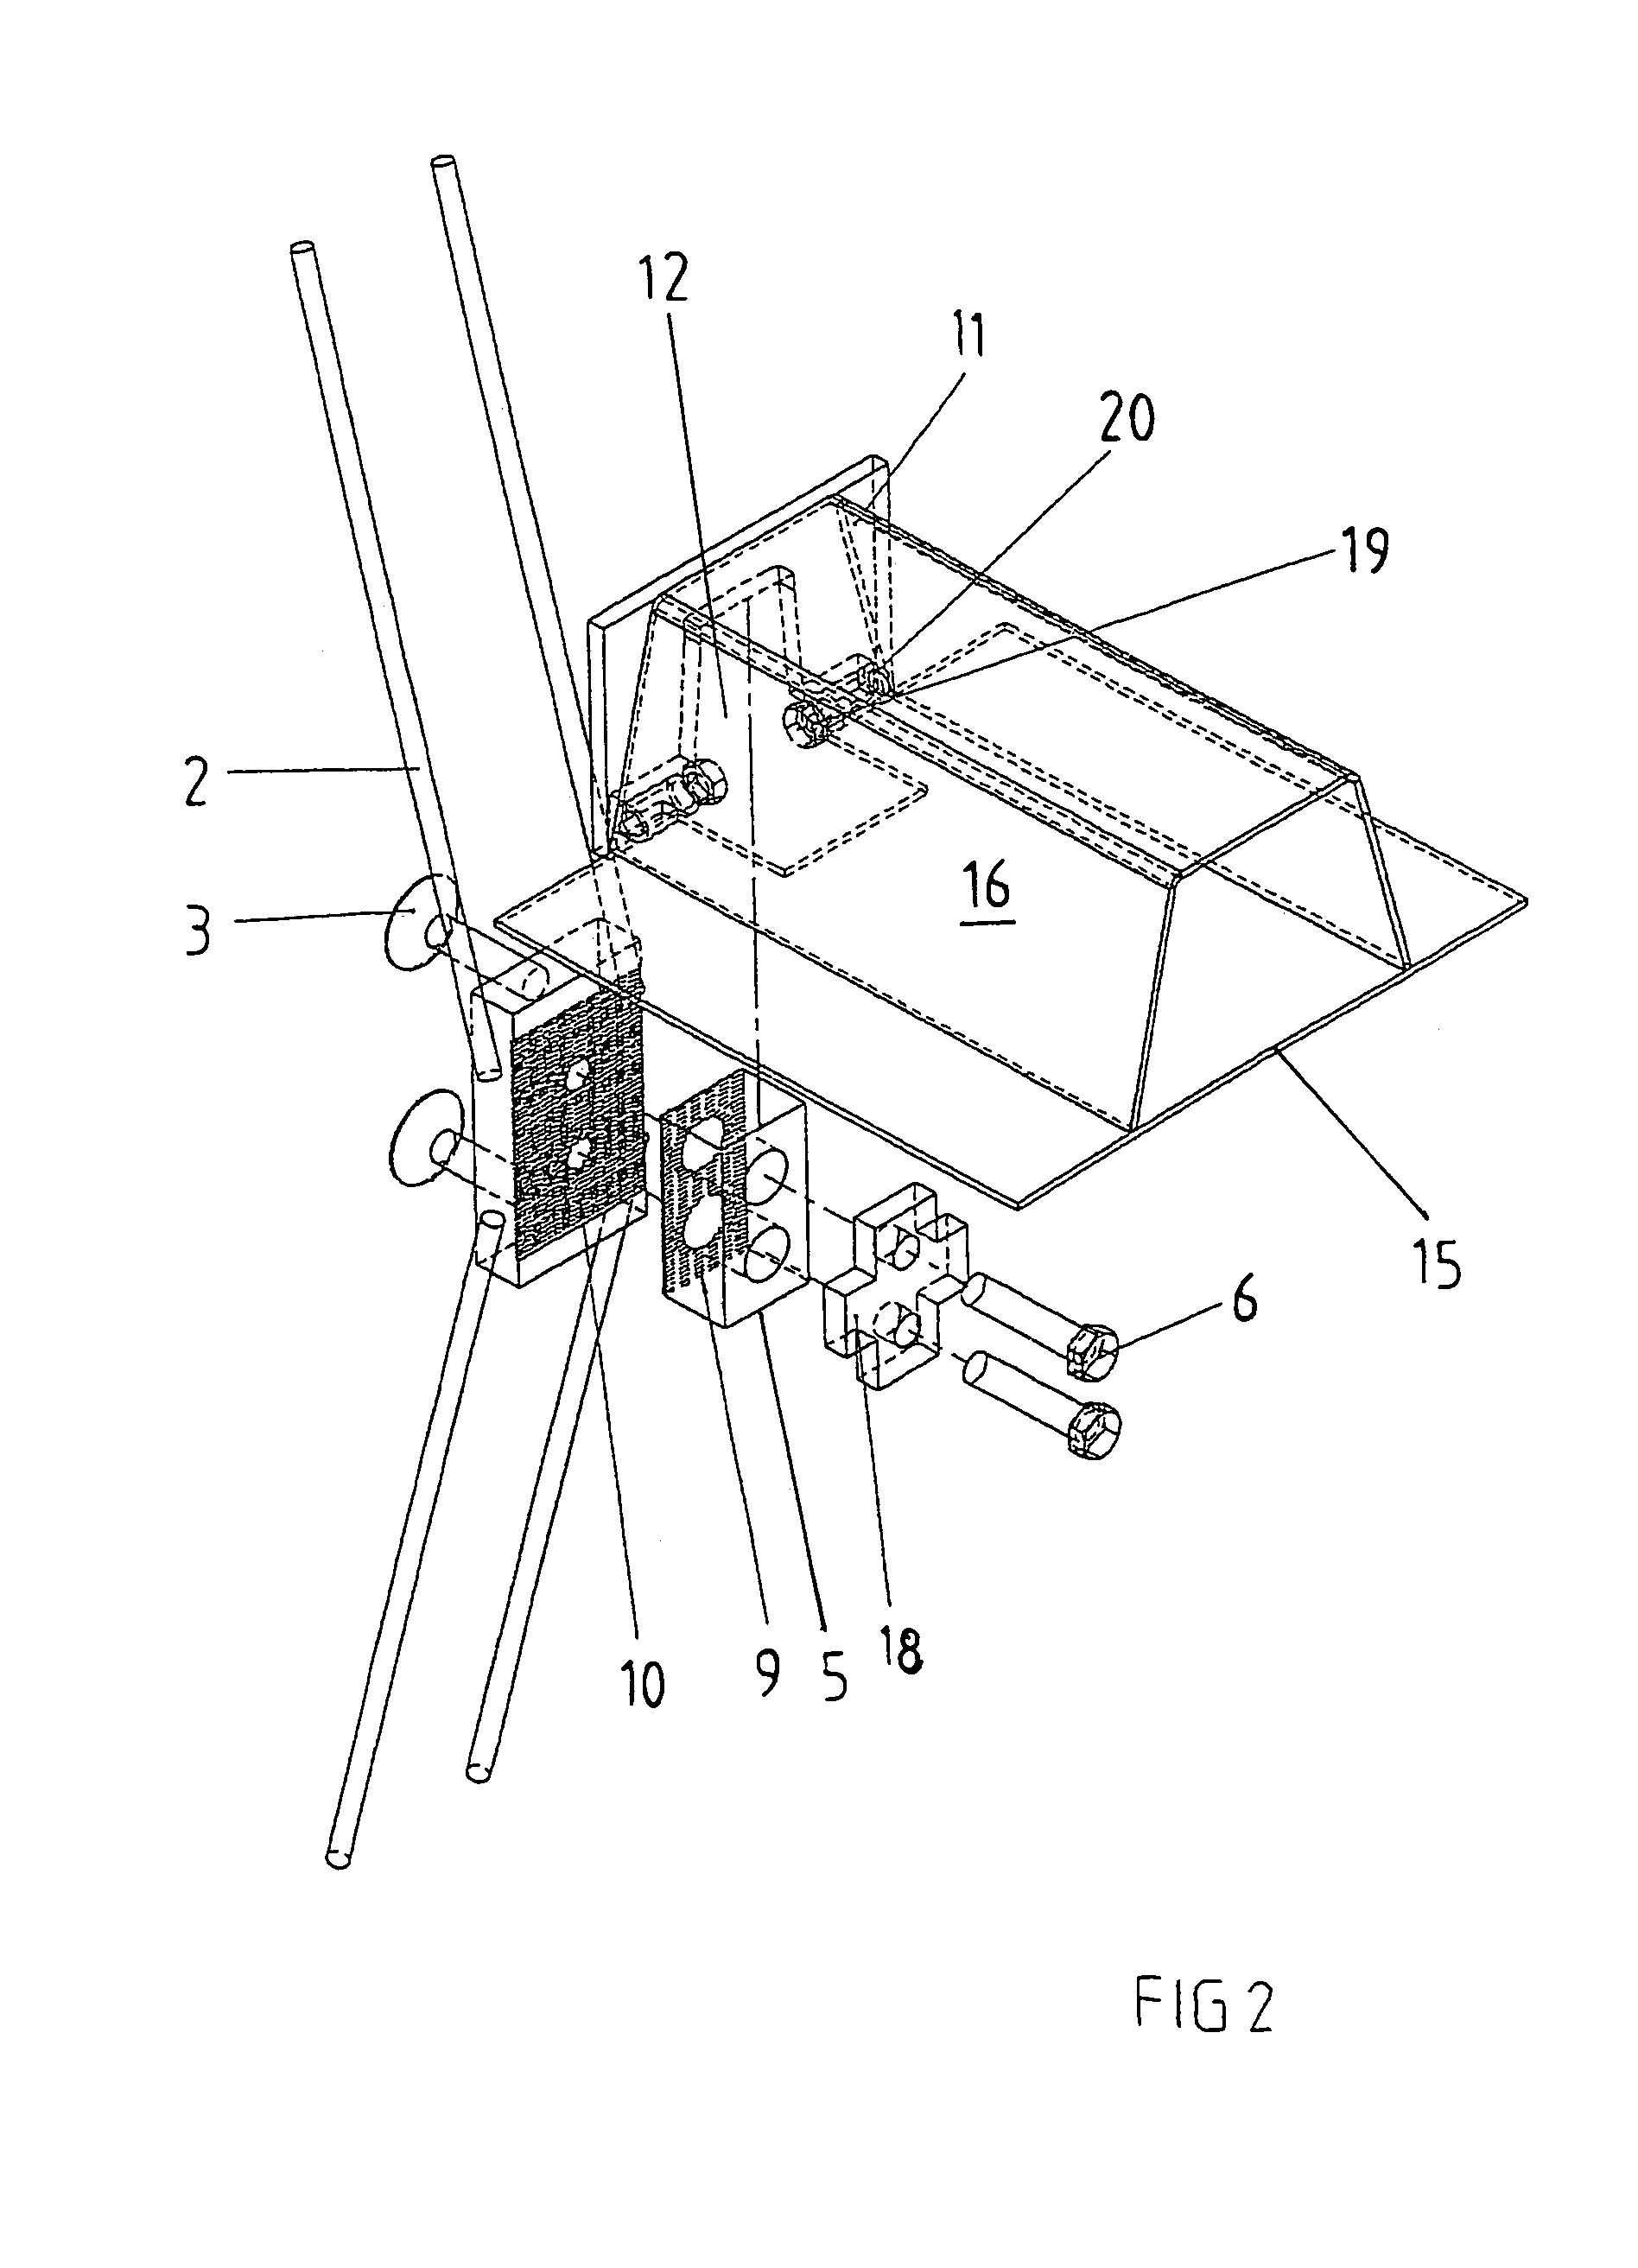 Bracket for supporting structural element to support structure